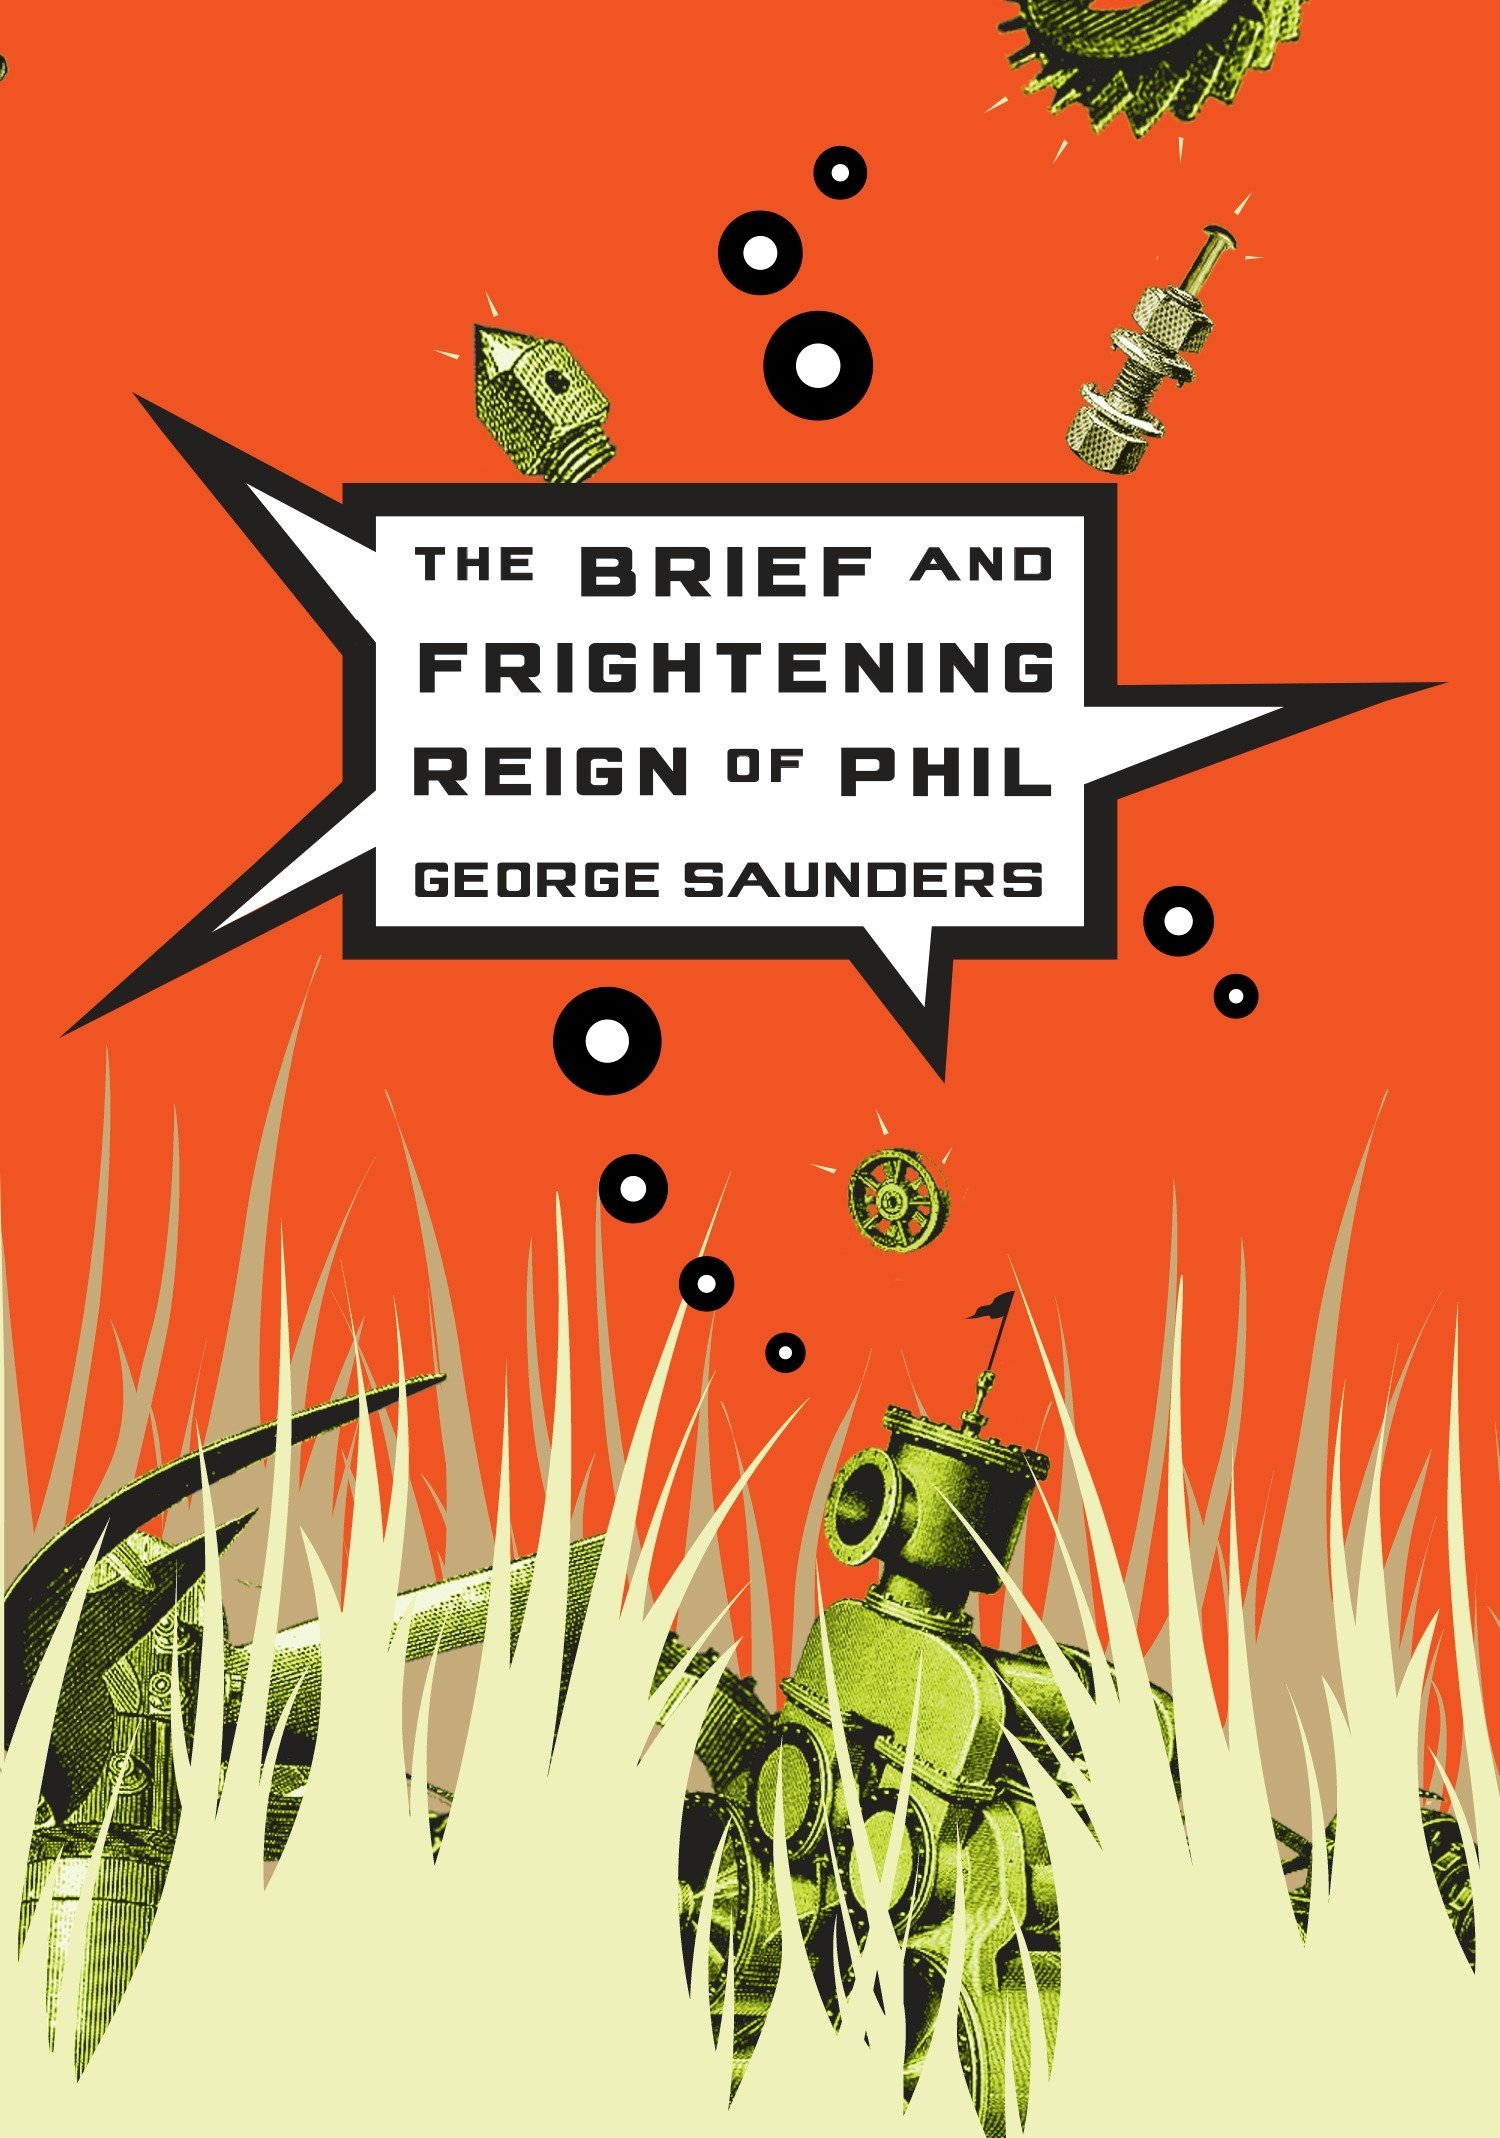 The Brief and. Frightening Reign of Phil by George Saunders